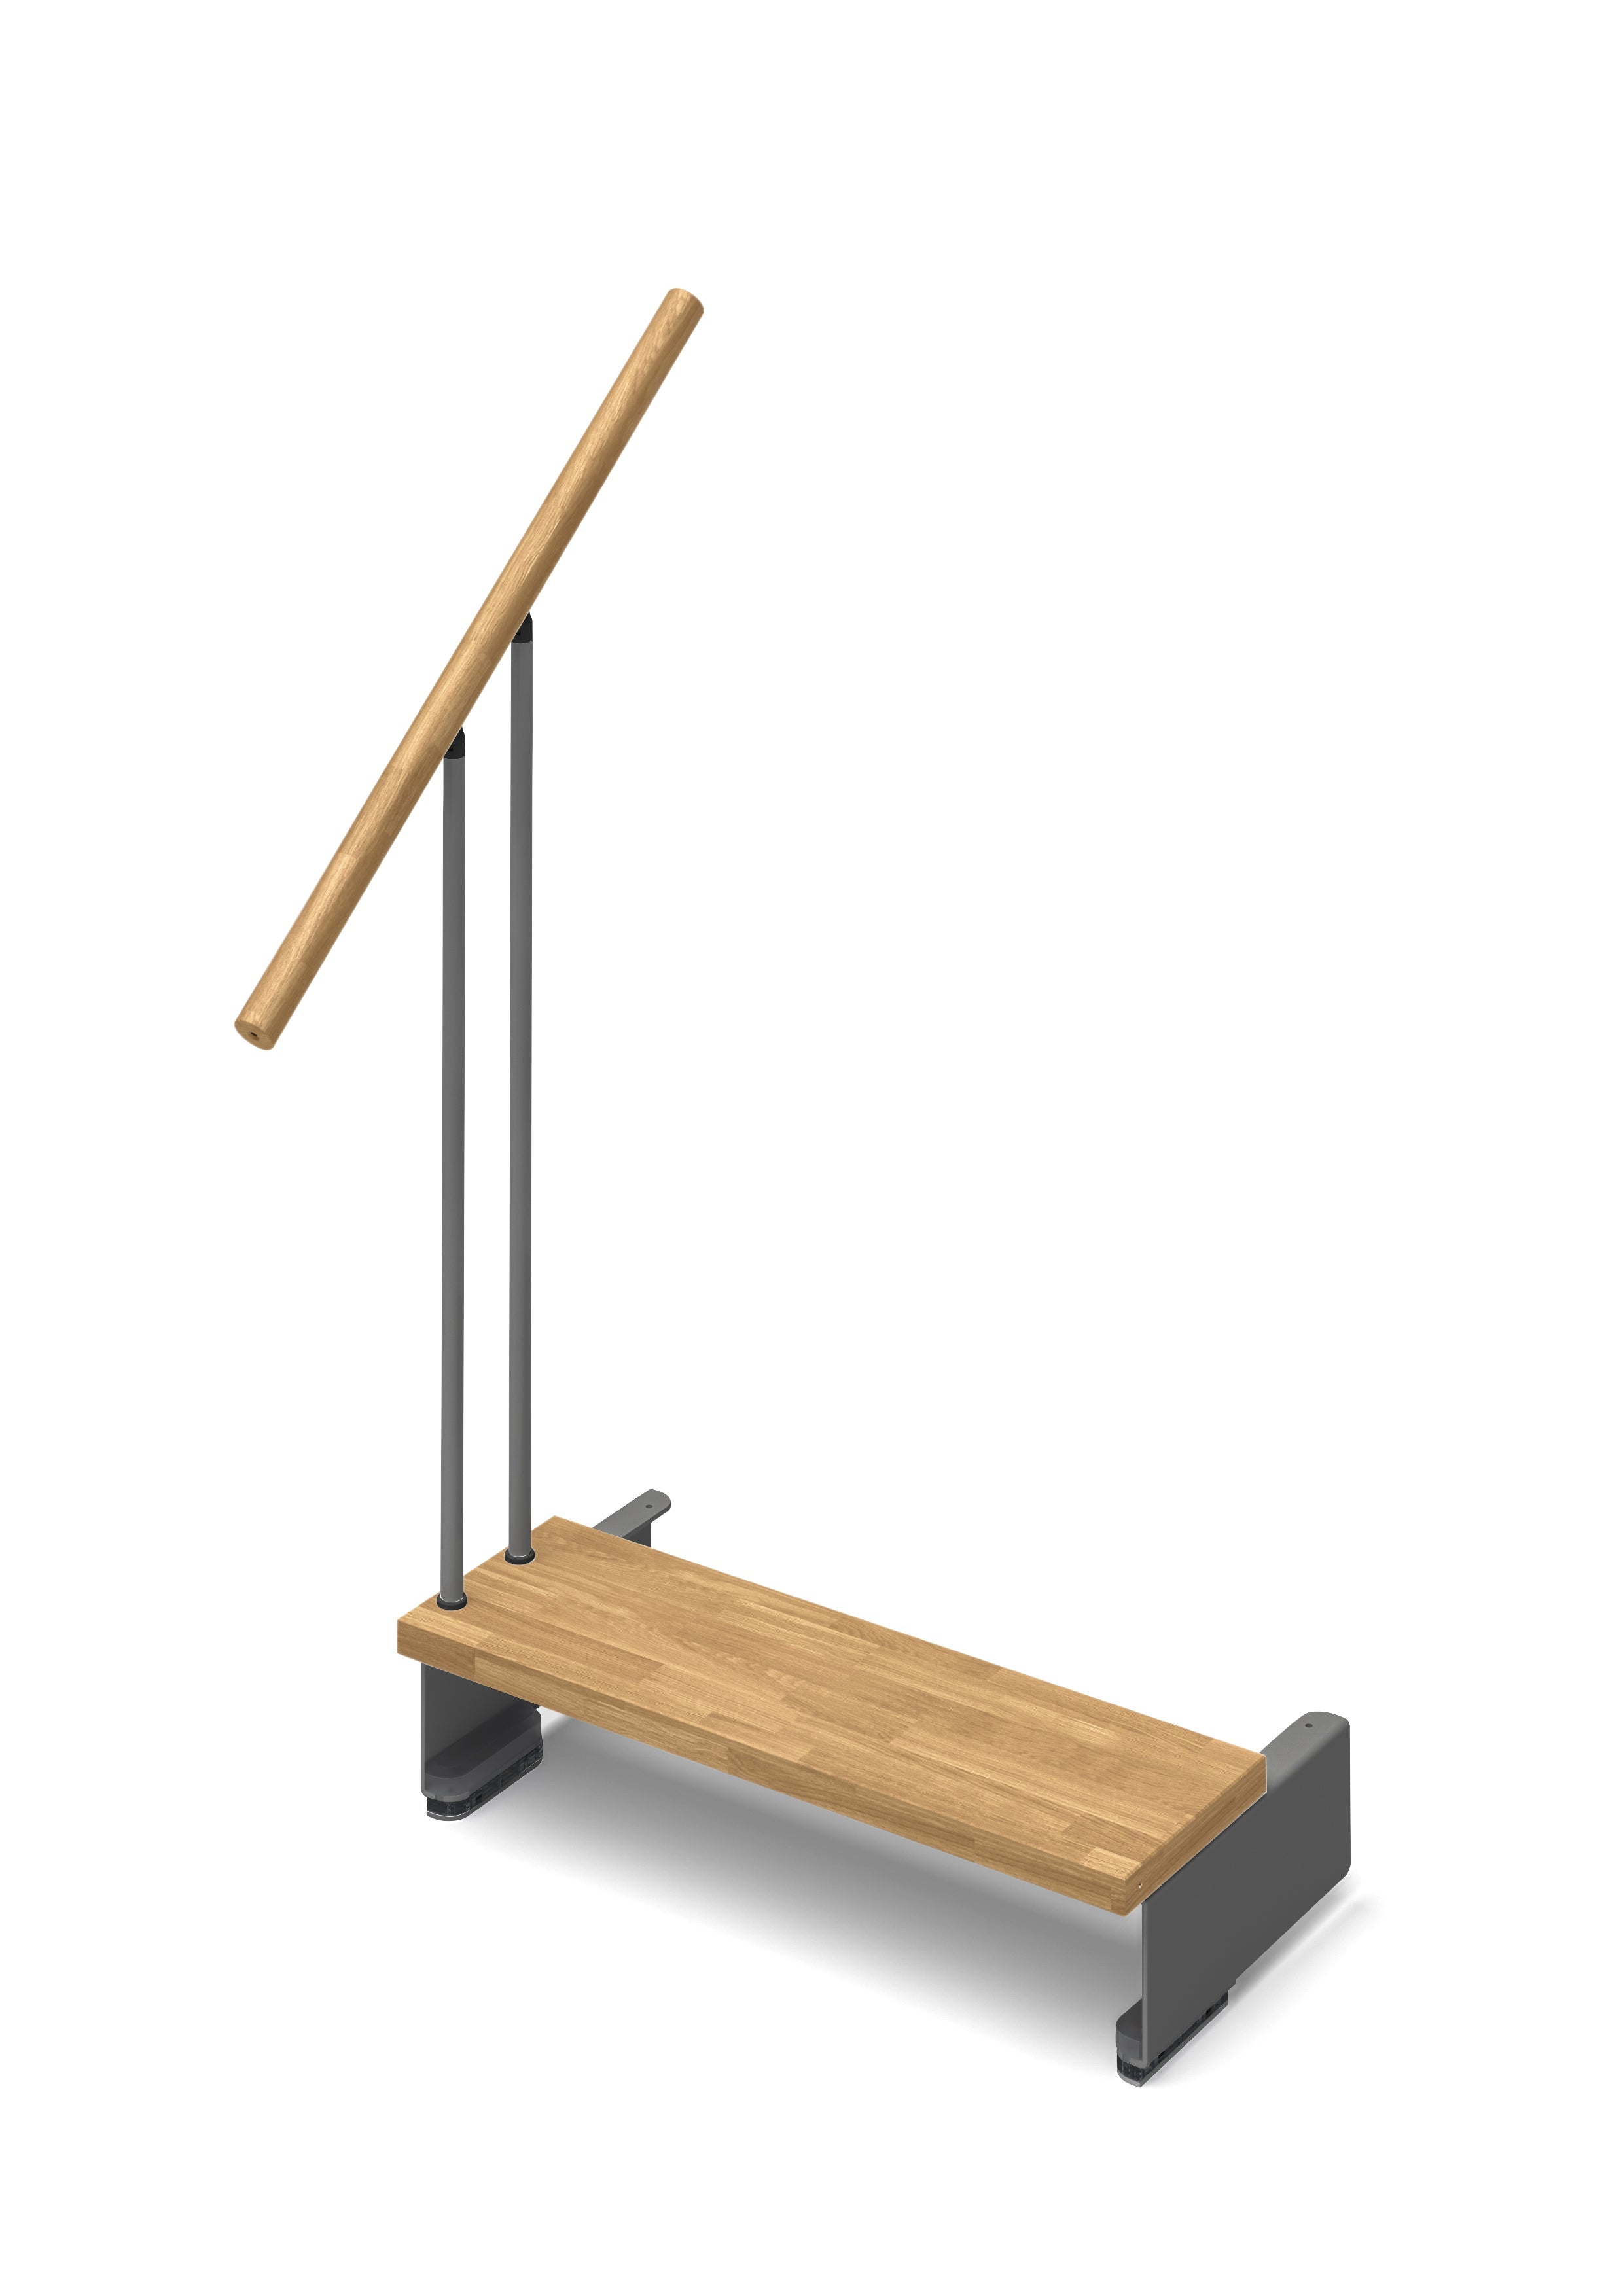 Additional step Adapta 74cm (with structure and railing) - Natural 12